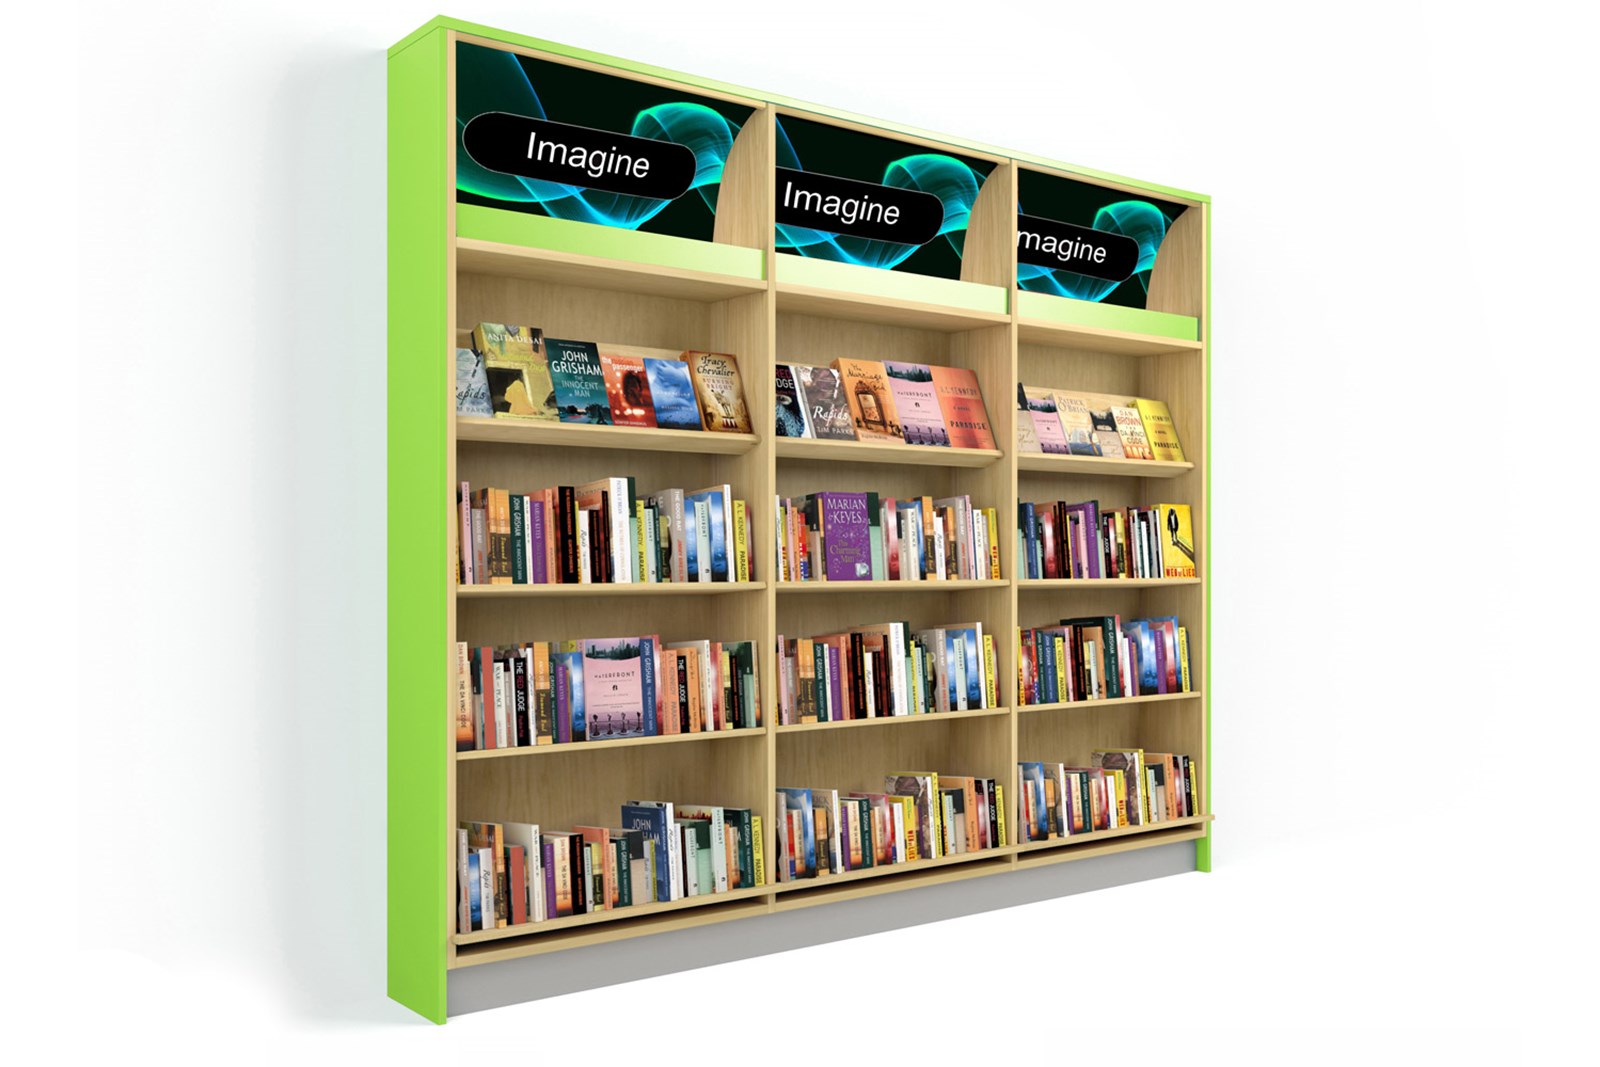 Shelving fitted with LED lights to illuminate the customized graphic